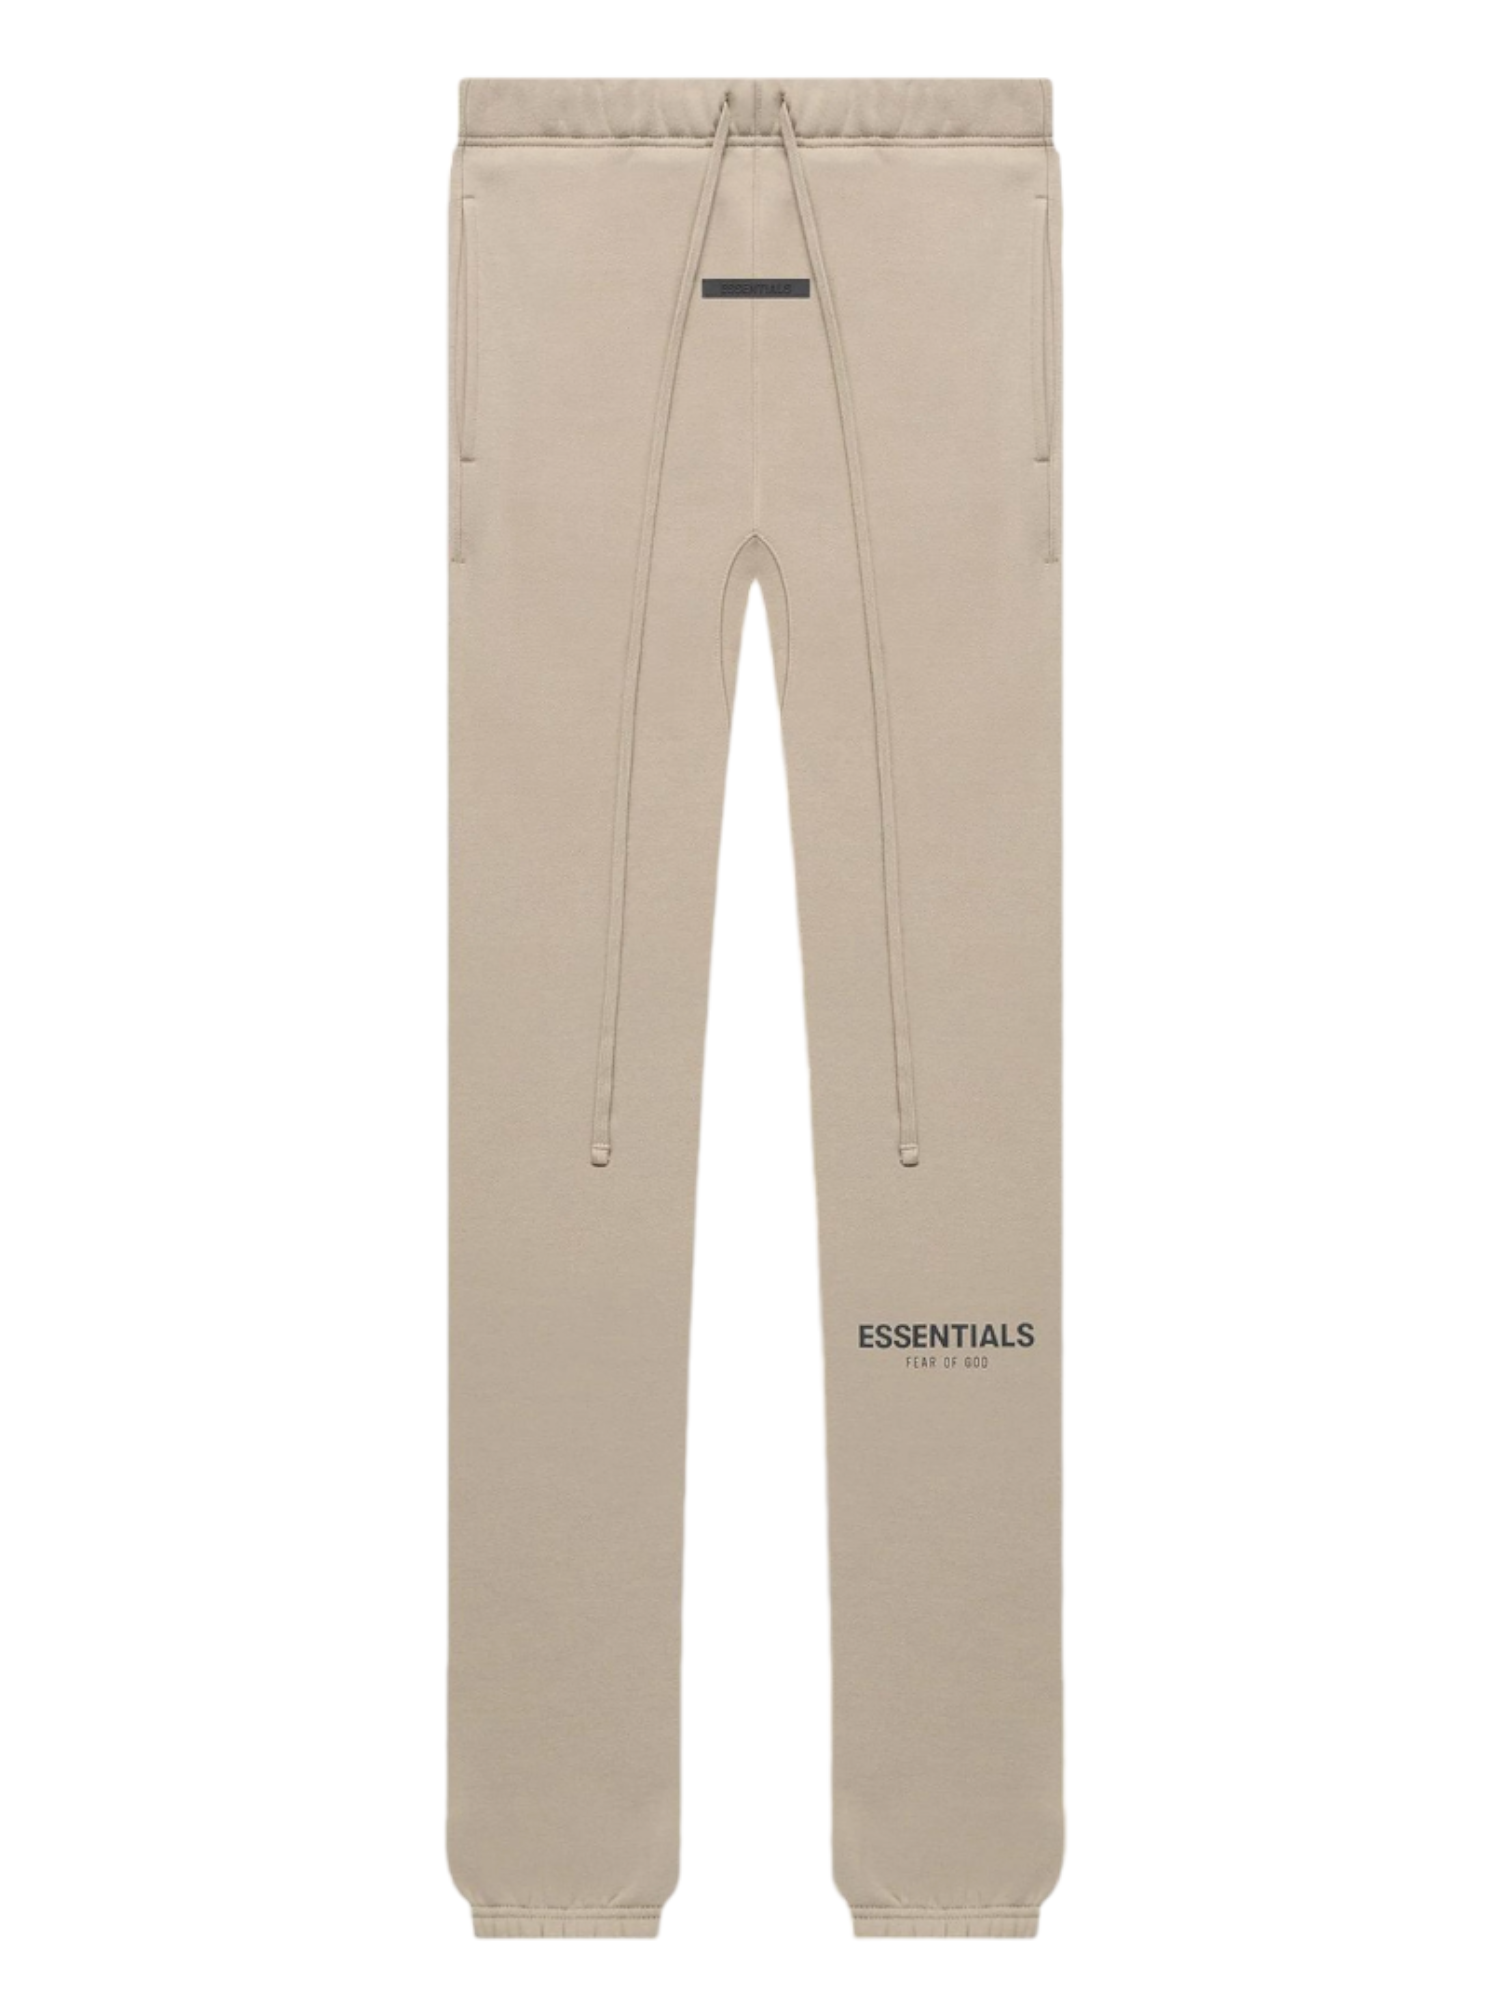 Essentials Fear of God Sweatpants Tan / String FW21 - Genuine Design Luxury Consignment Calgary, Canada New & Pre-Owned Authentic Clothing, Shoes, Accessories.